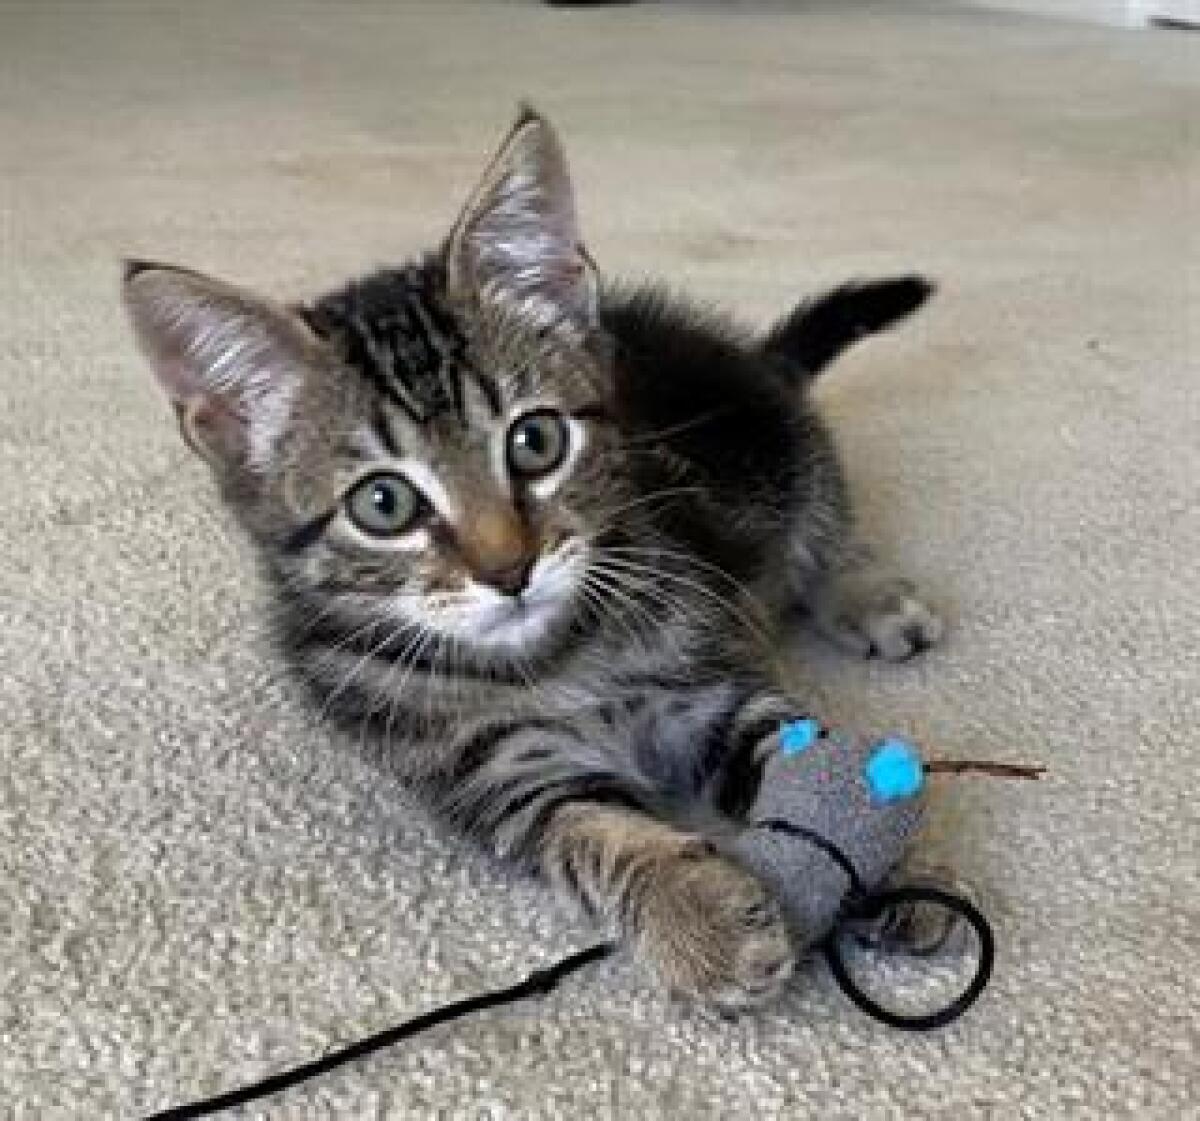 An 11-week-old kitten plays with a cat toy.